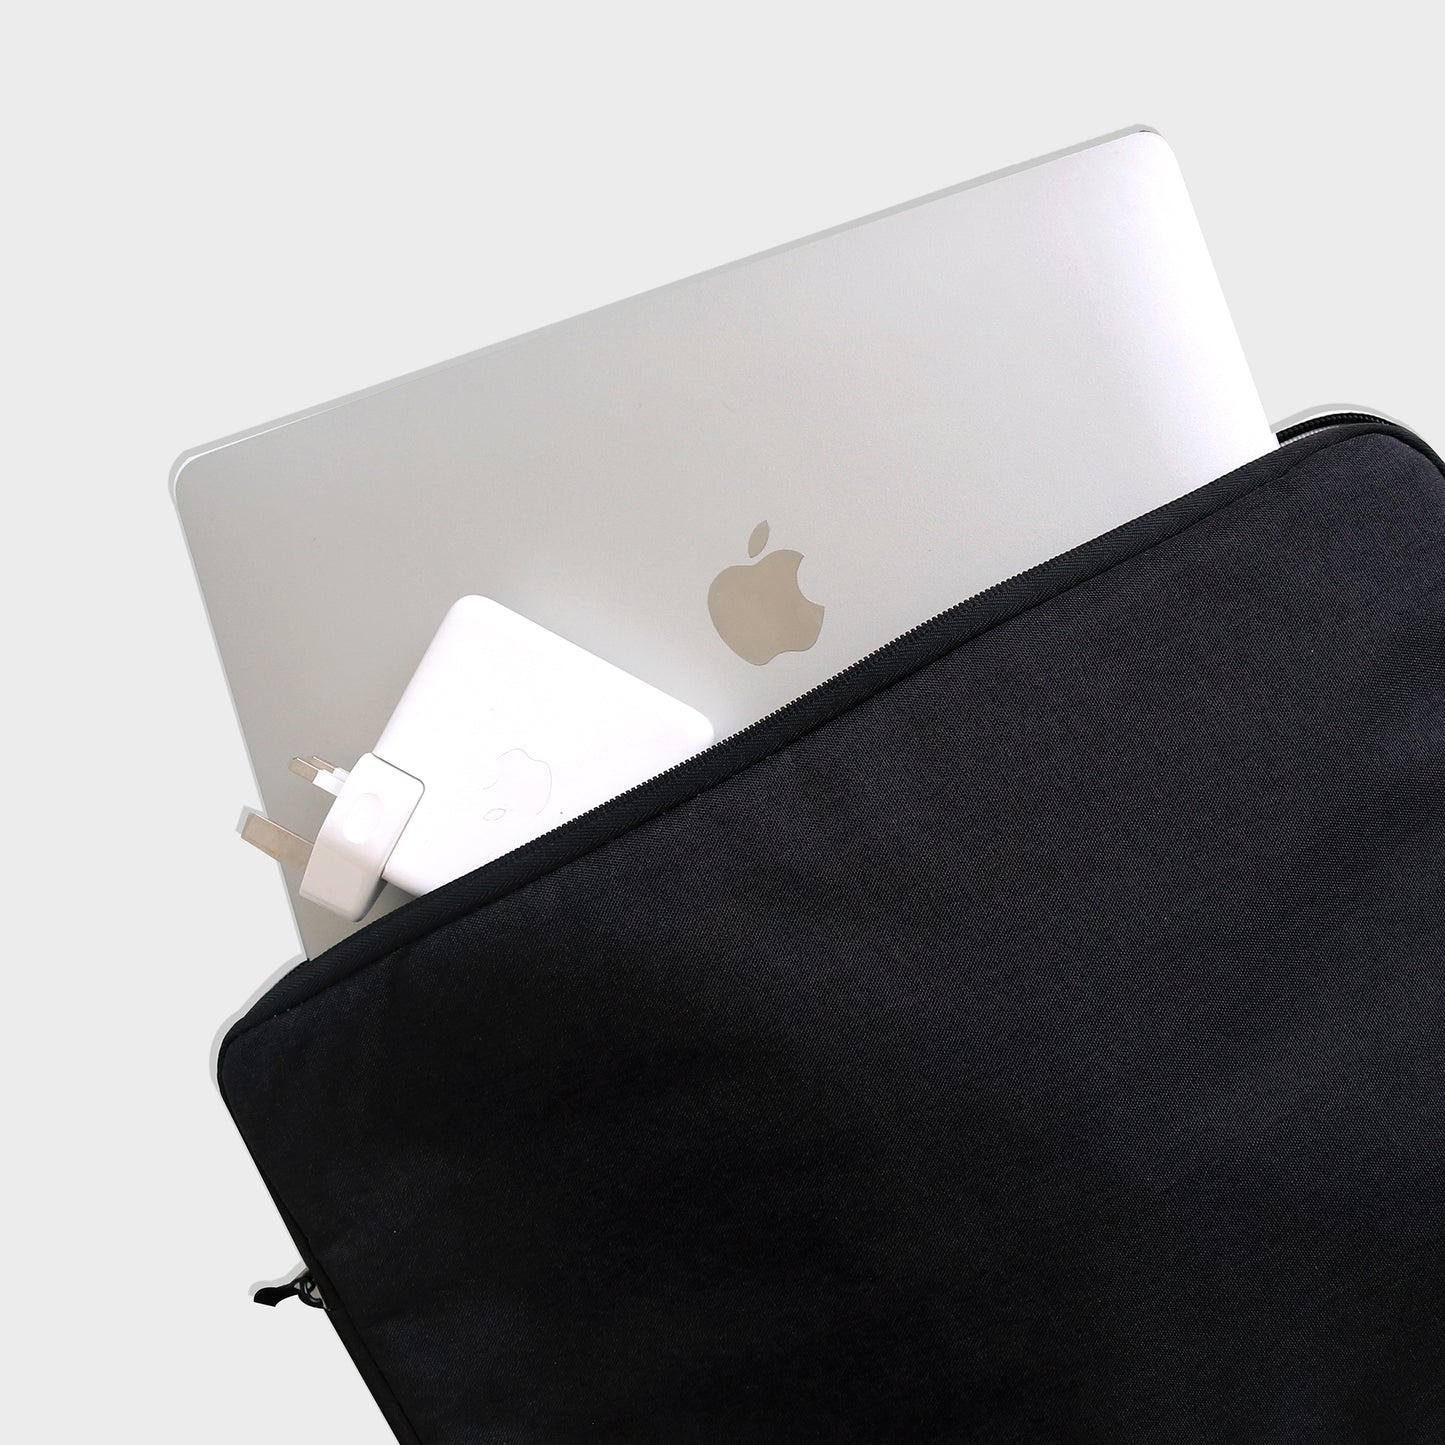 Universal Laptop Pouch - Be Yourself